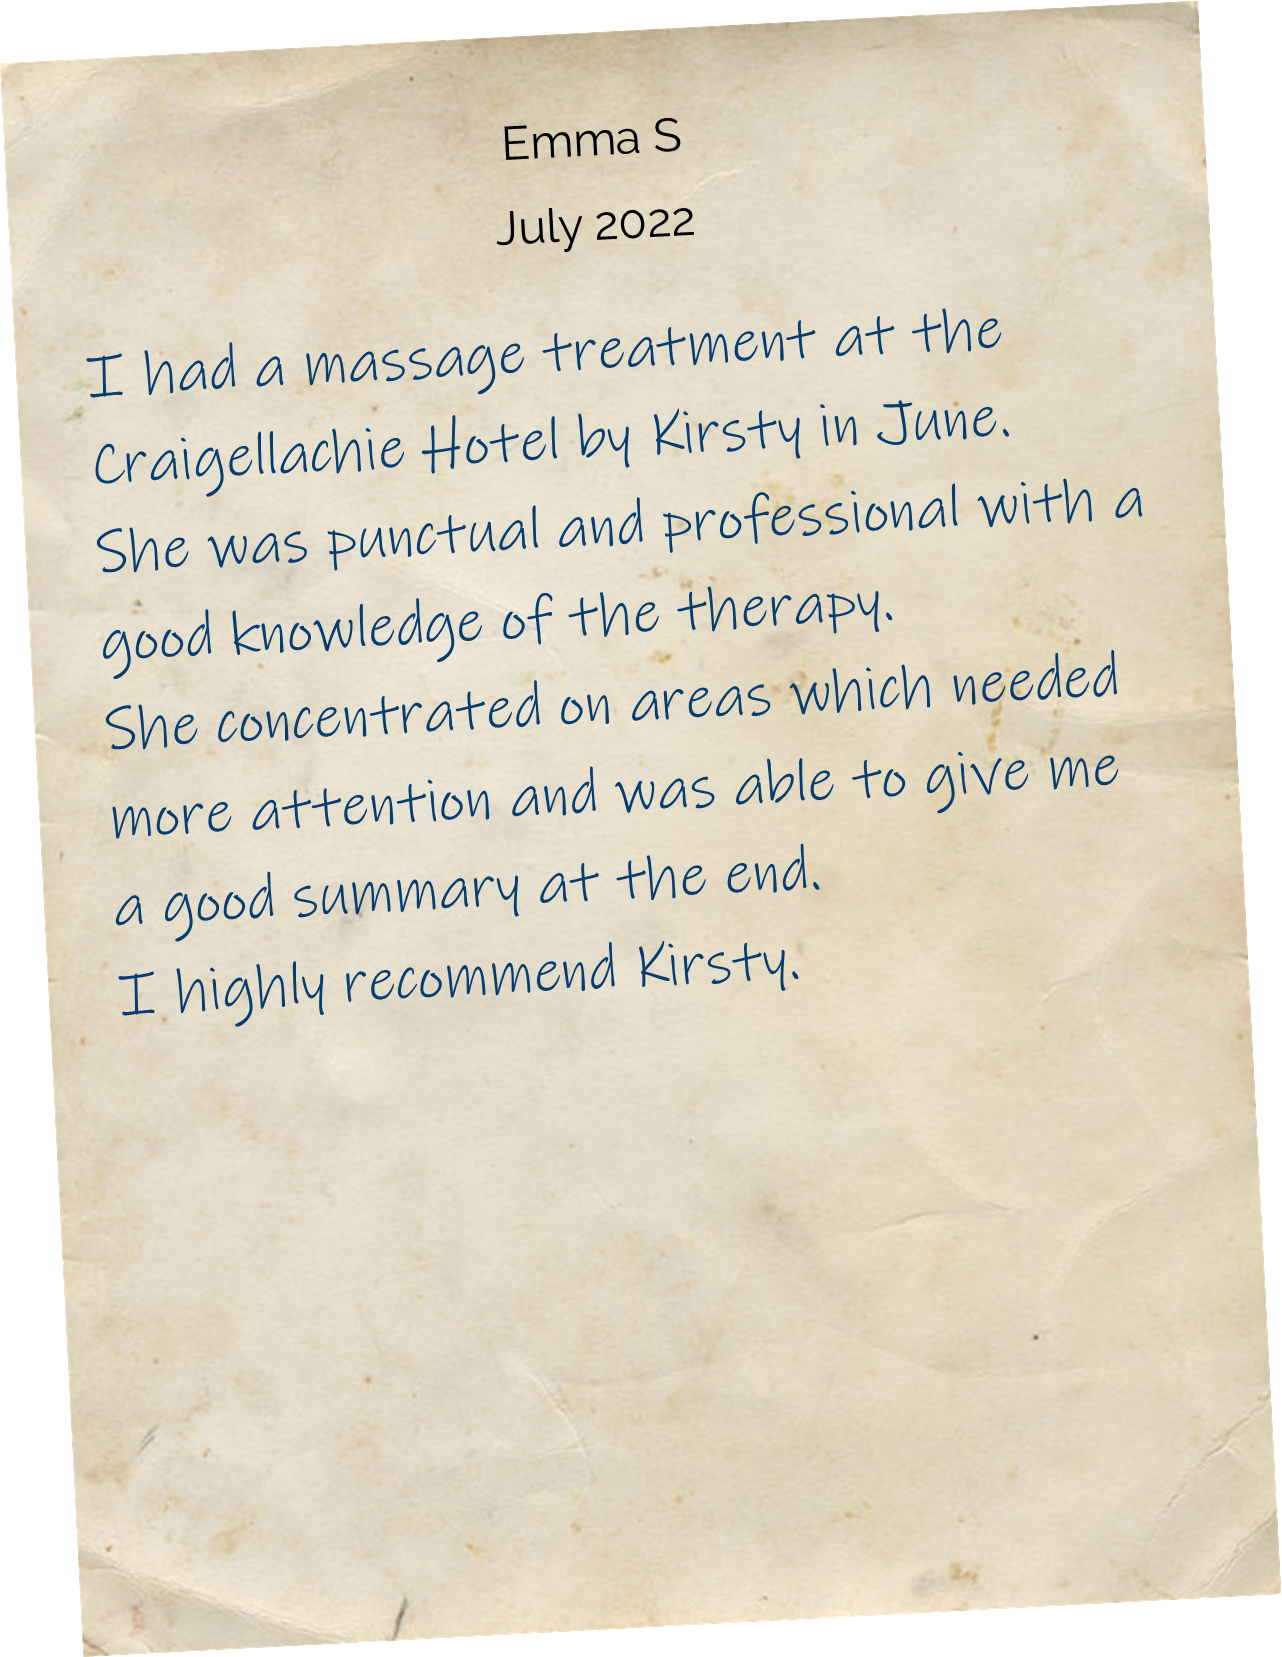 I had a massage treatment at the Craigellachie Hotel by Kirsty in June. She was punctual and professional with a good knowledge of the therapy. She concentrated on areas which needed more attention and was able to give me a good summary at the end. I highly recommend Kirsty.